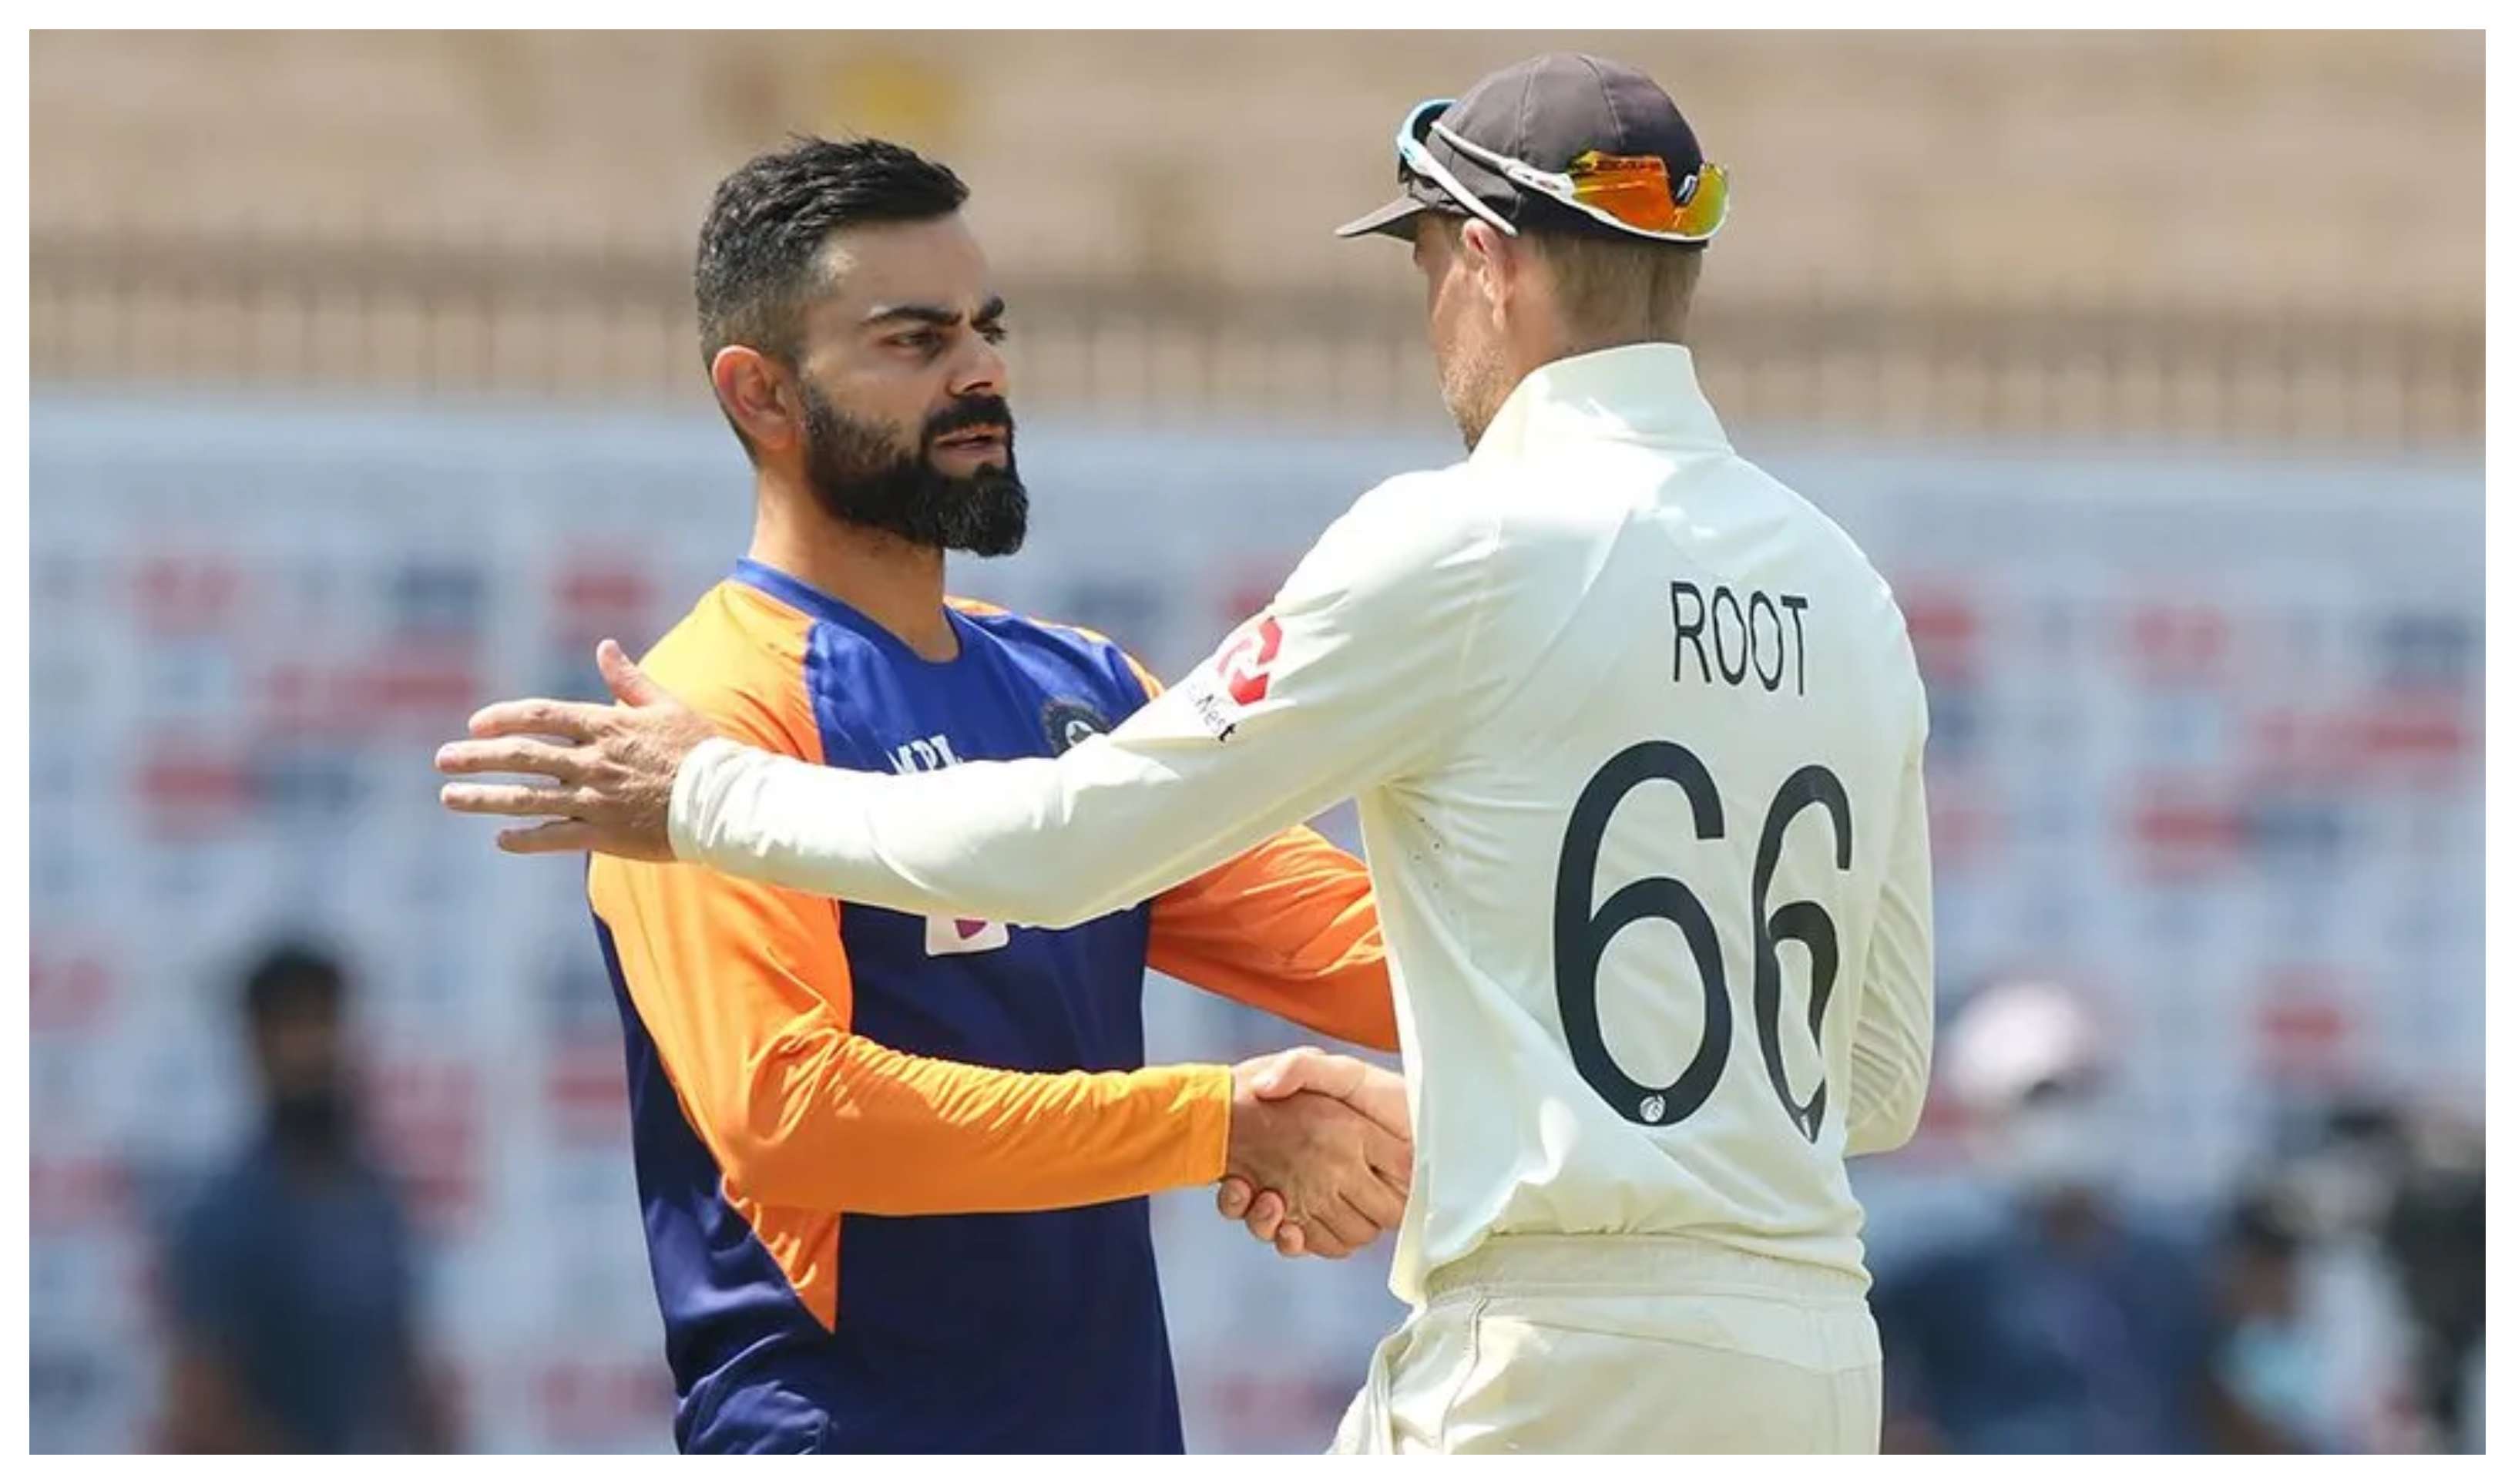 Virat Kohli shakes hand with Joe Root after the conclusion of first Test | BCCI